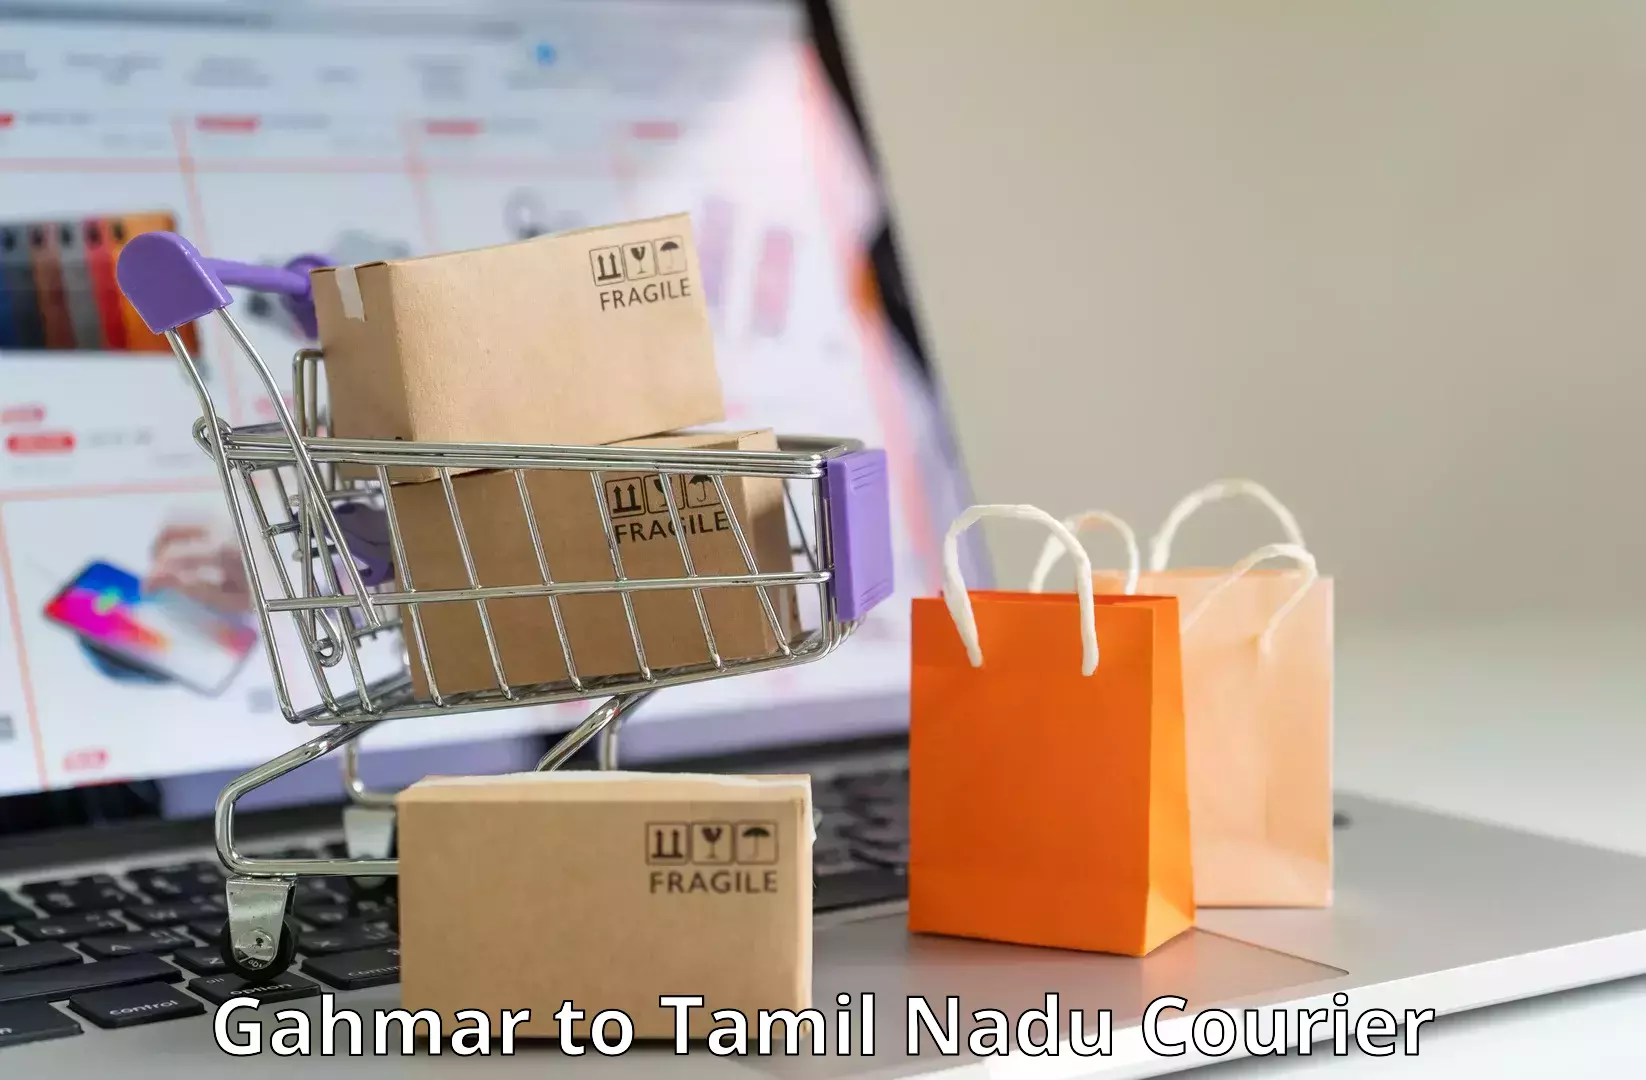 State-of-the-art courier technology Gahmar to Dindigul